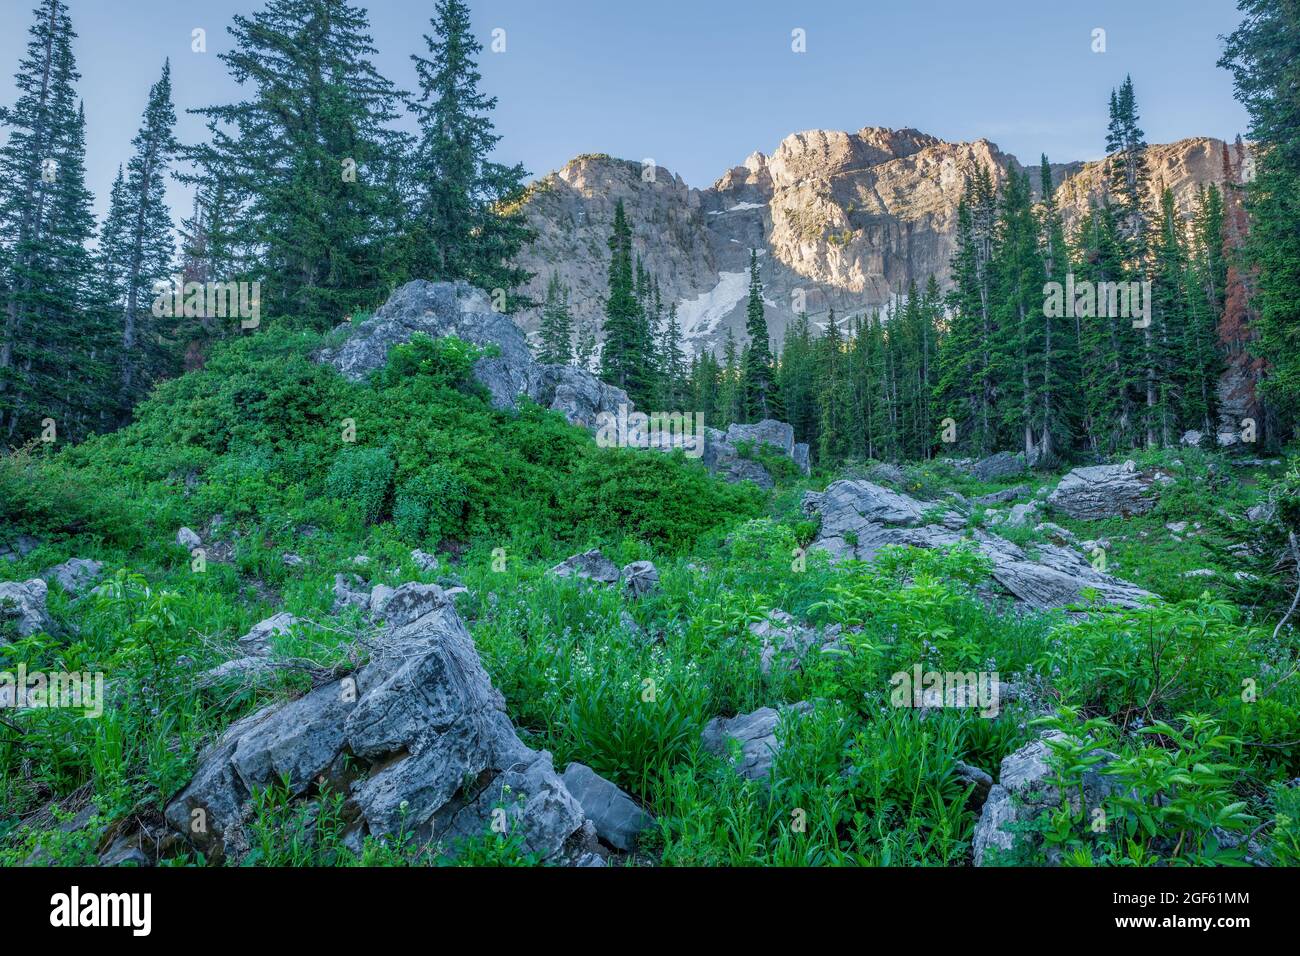 Field of wildflowers and rocks below the Devil's Castle, Albion Basin, Little Cottonwood Canyon, Wasatch Mountains, Utah Stock Photo